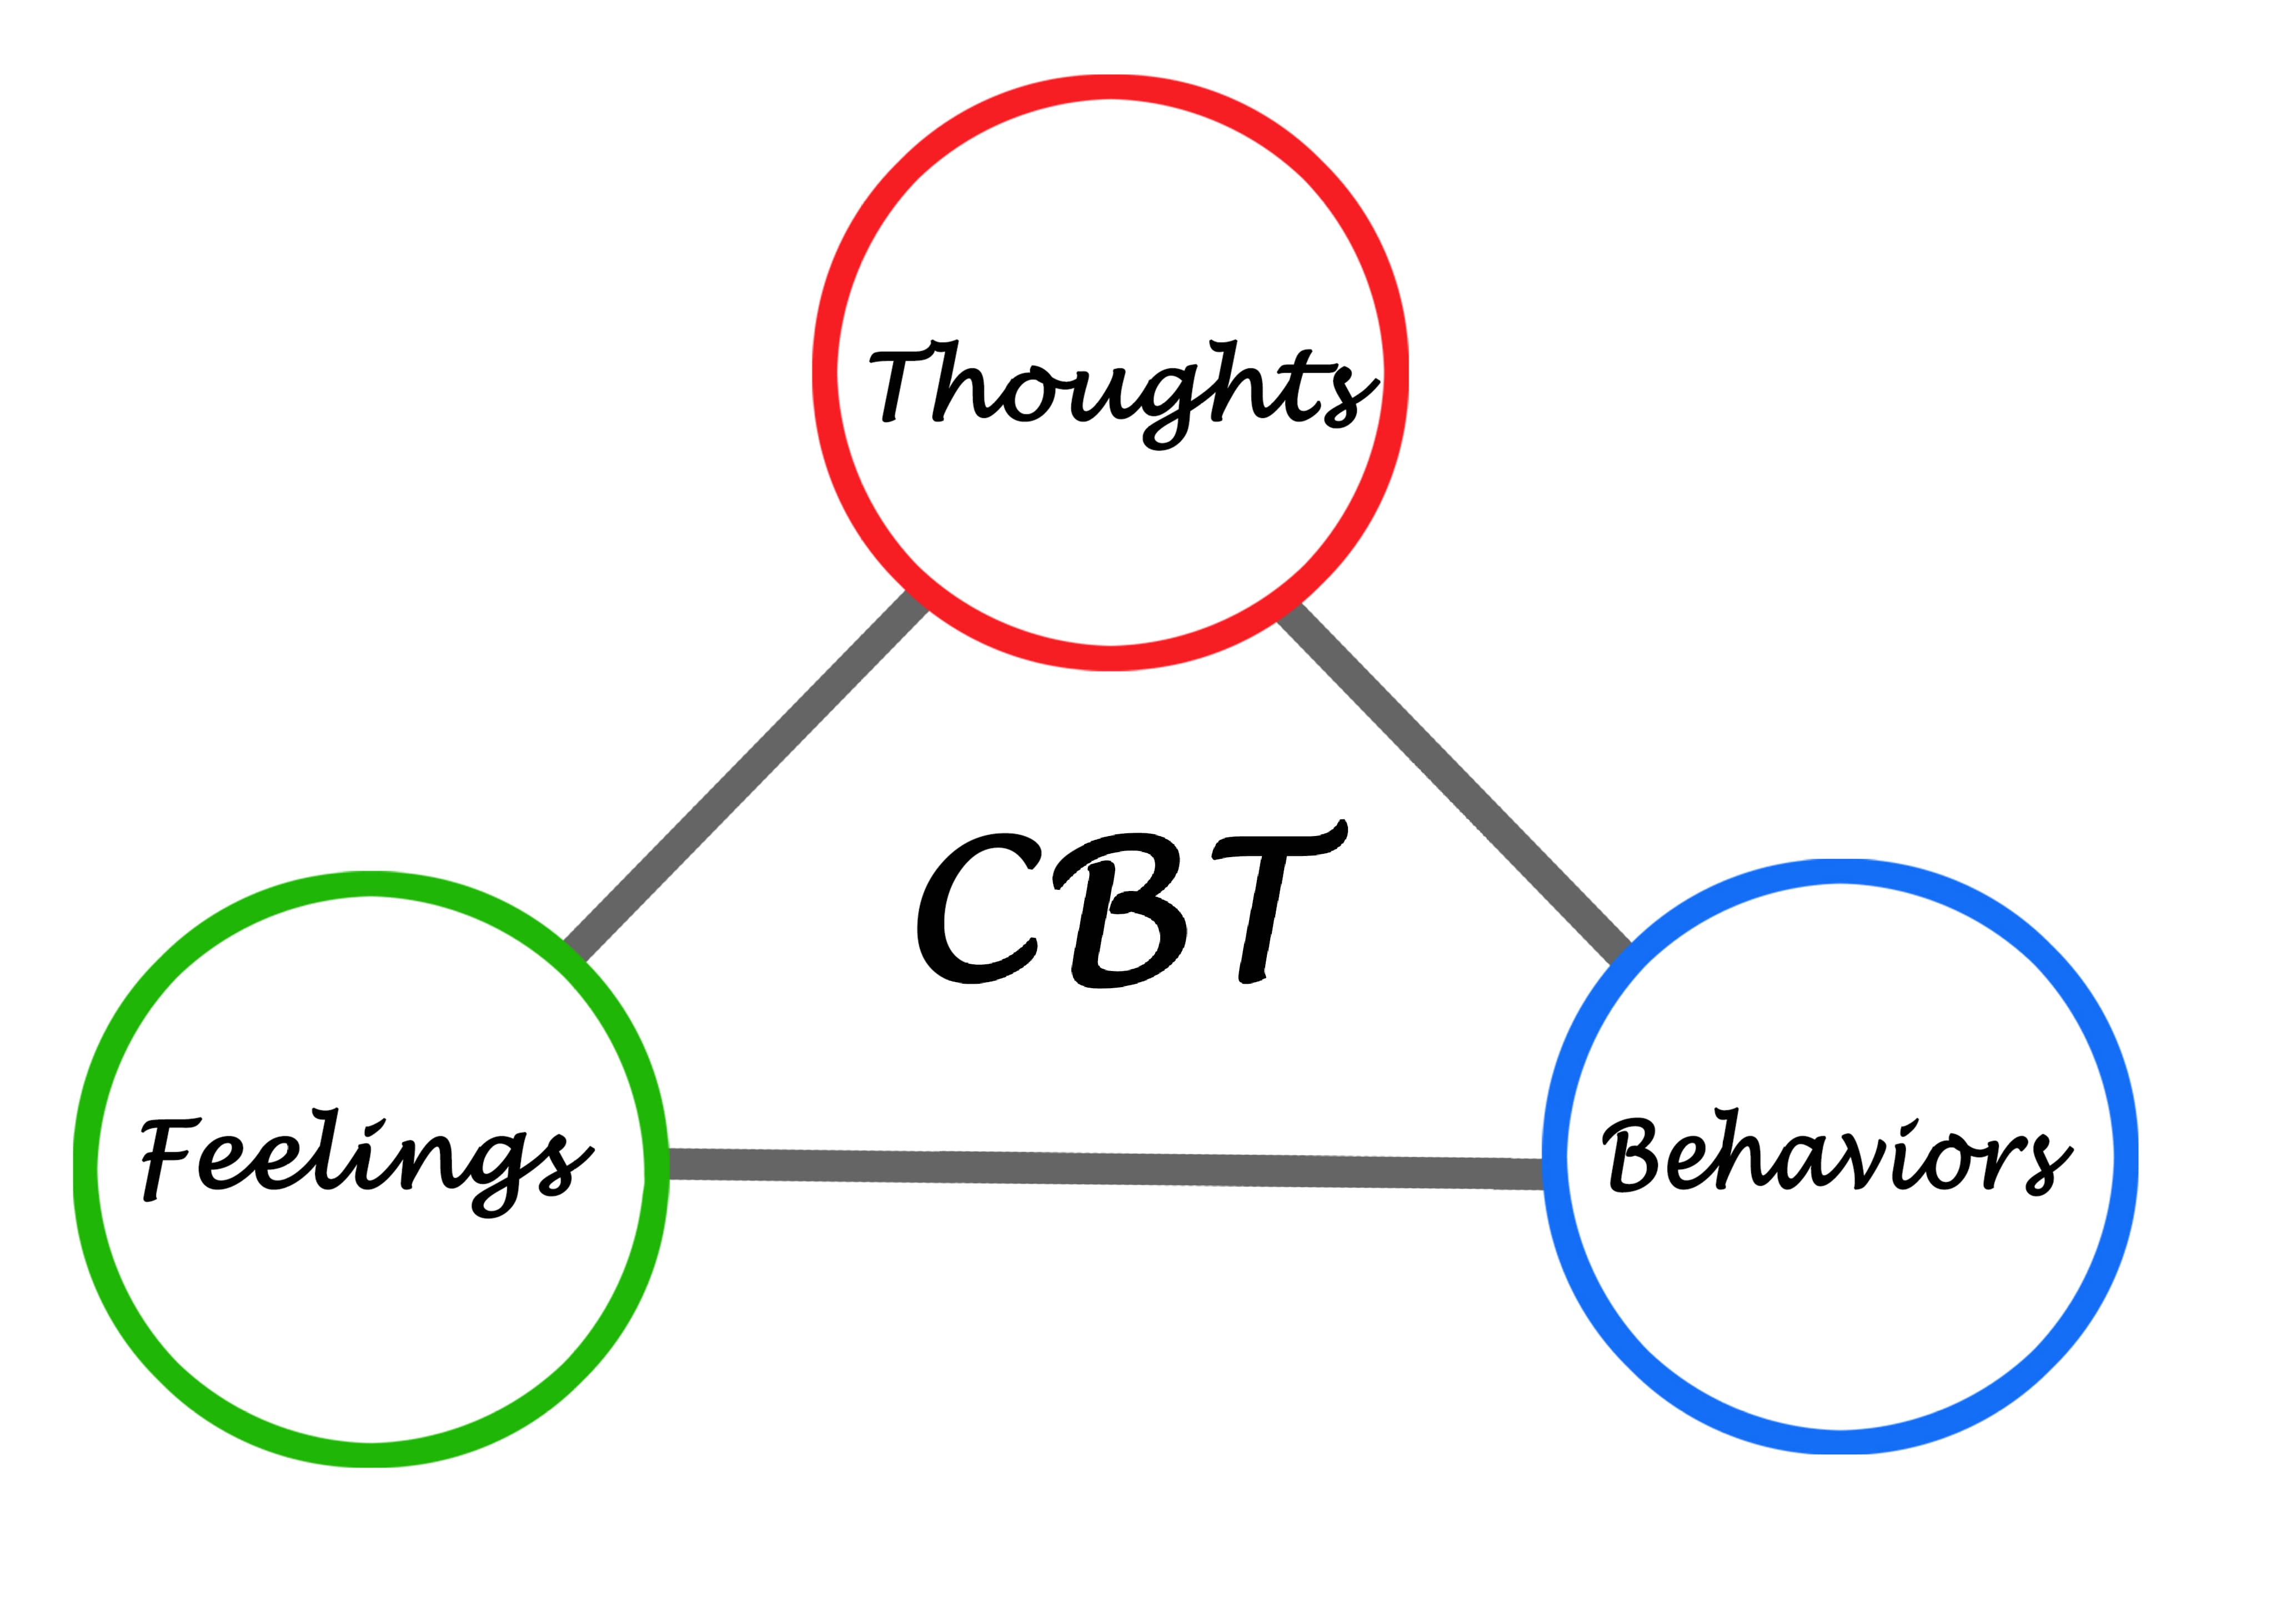 Cognitive behavioral therapy